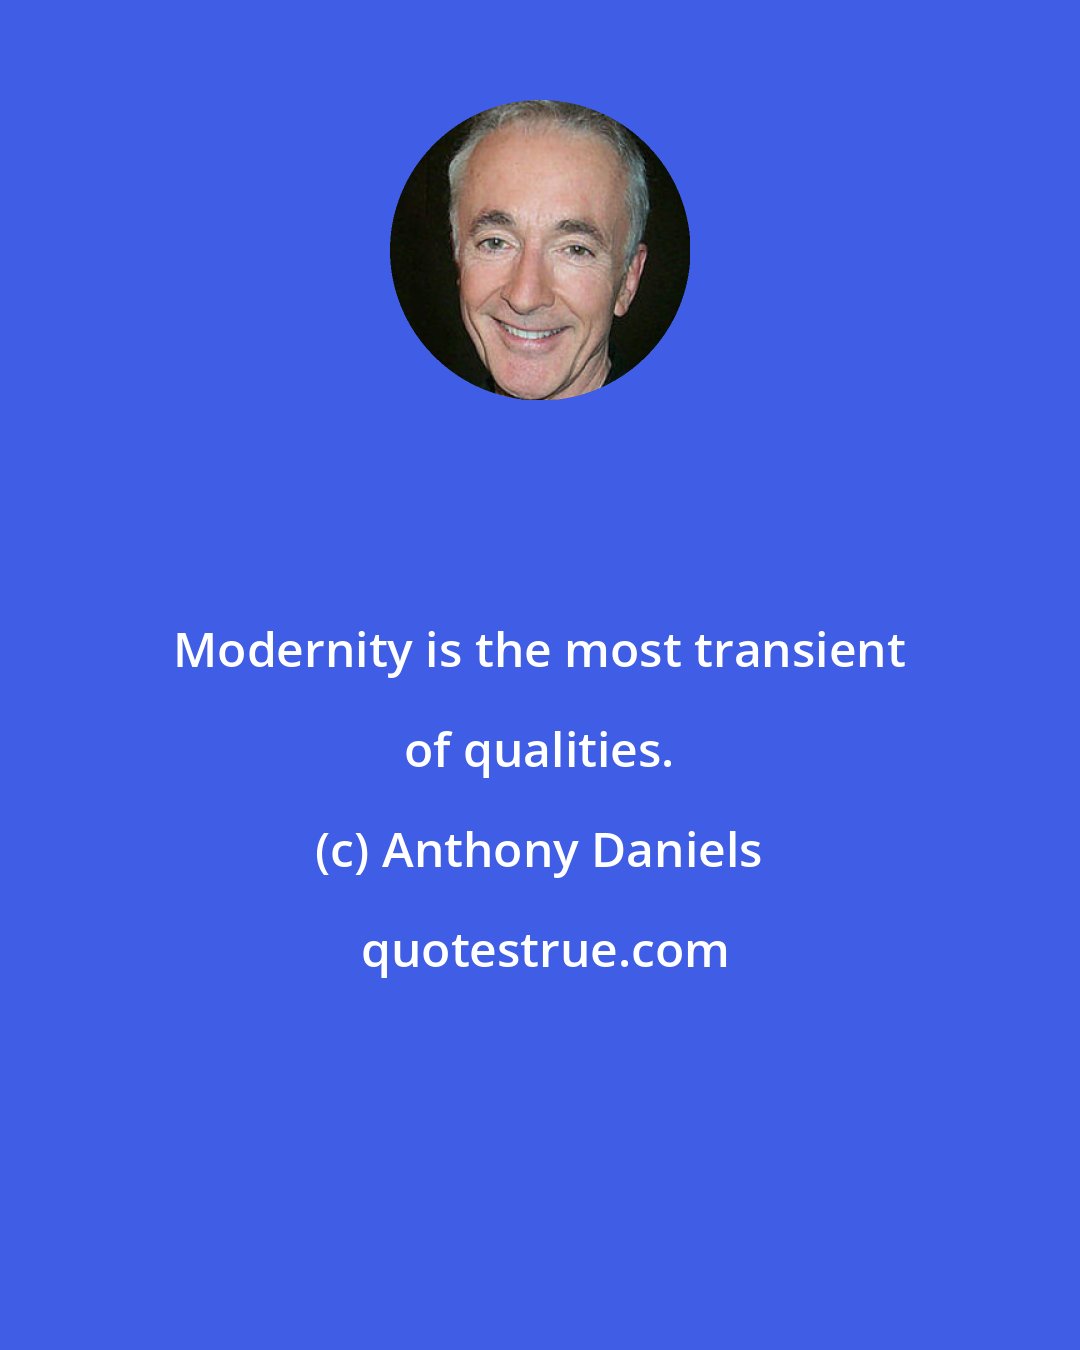 Anthony Daniels: Modernity is the most transient of qualities.